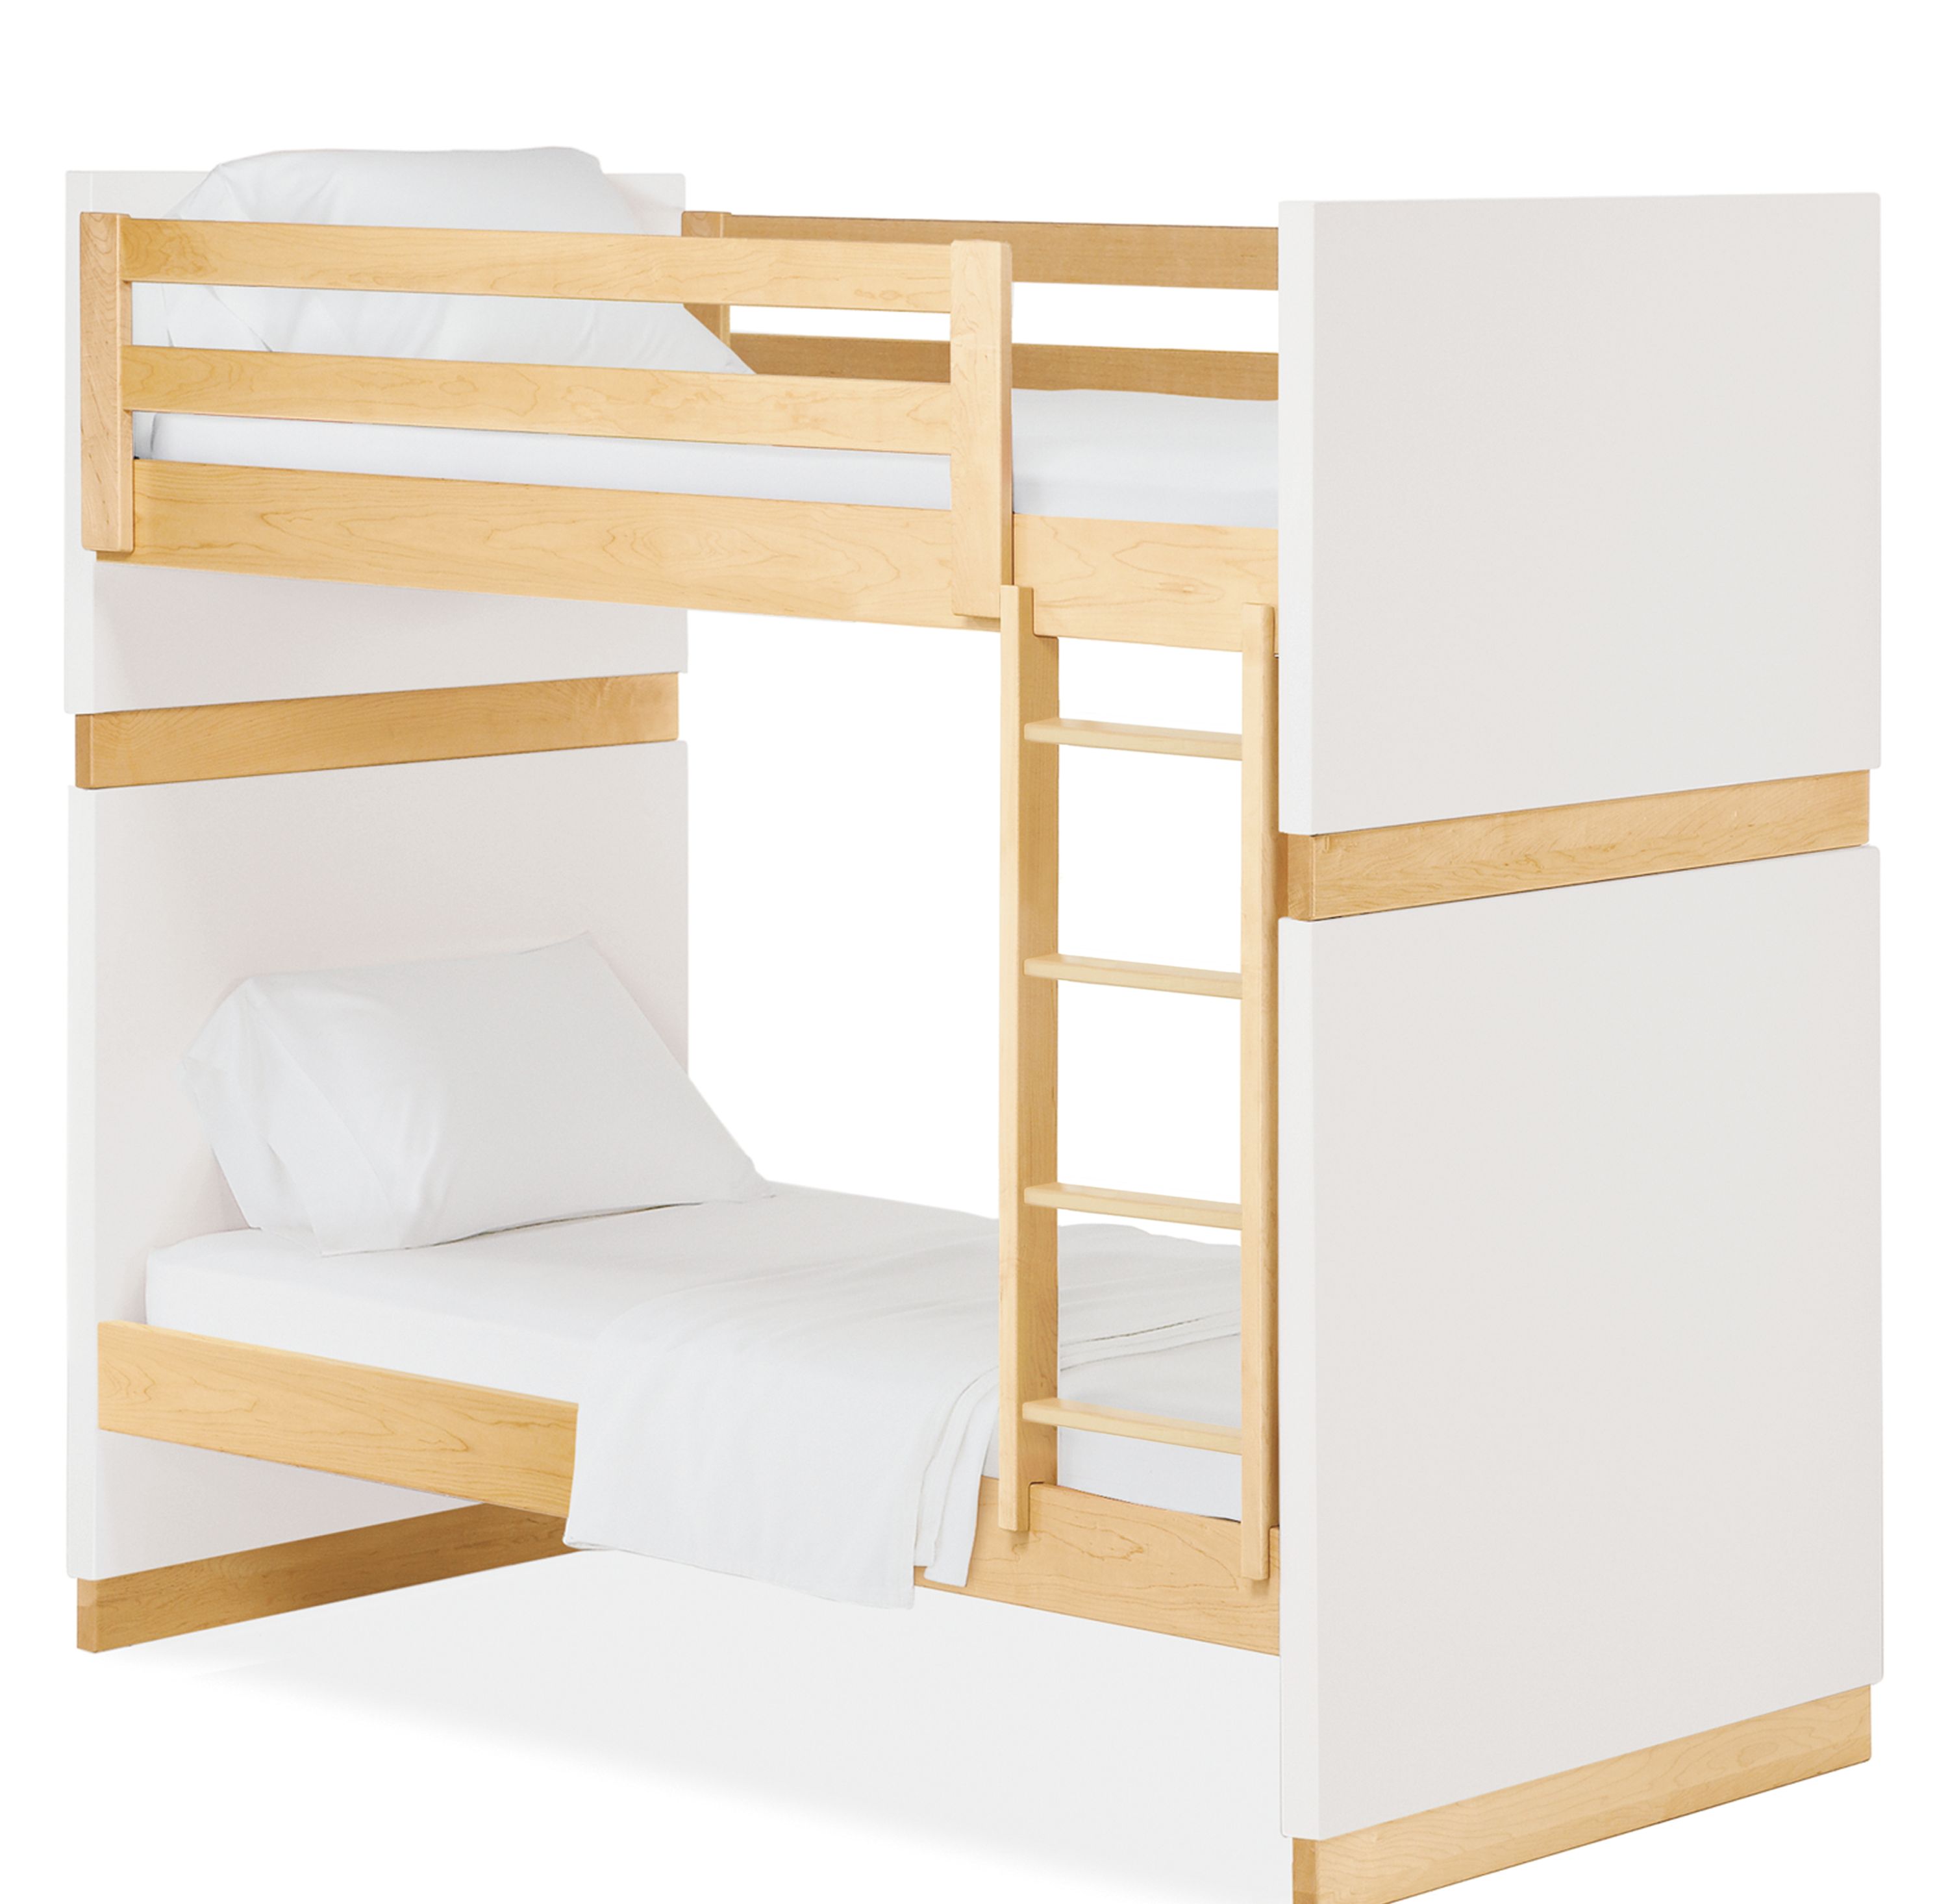 Moda Bunk Beds Twin Over, White Wooden Bunk Beds That Separate